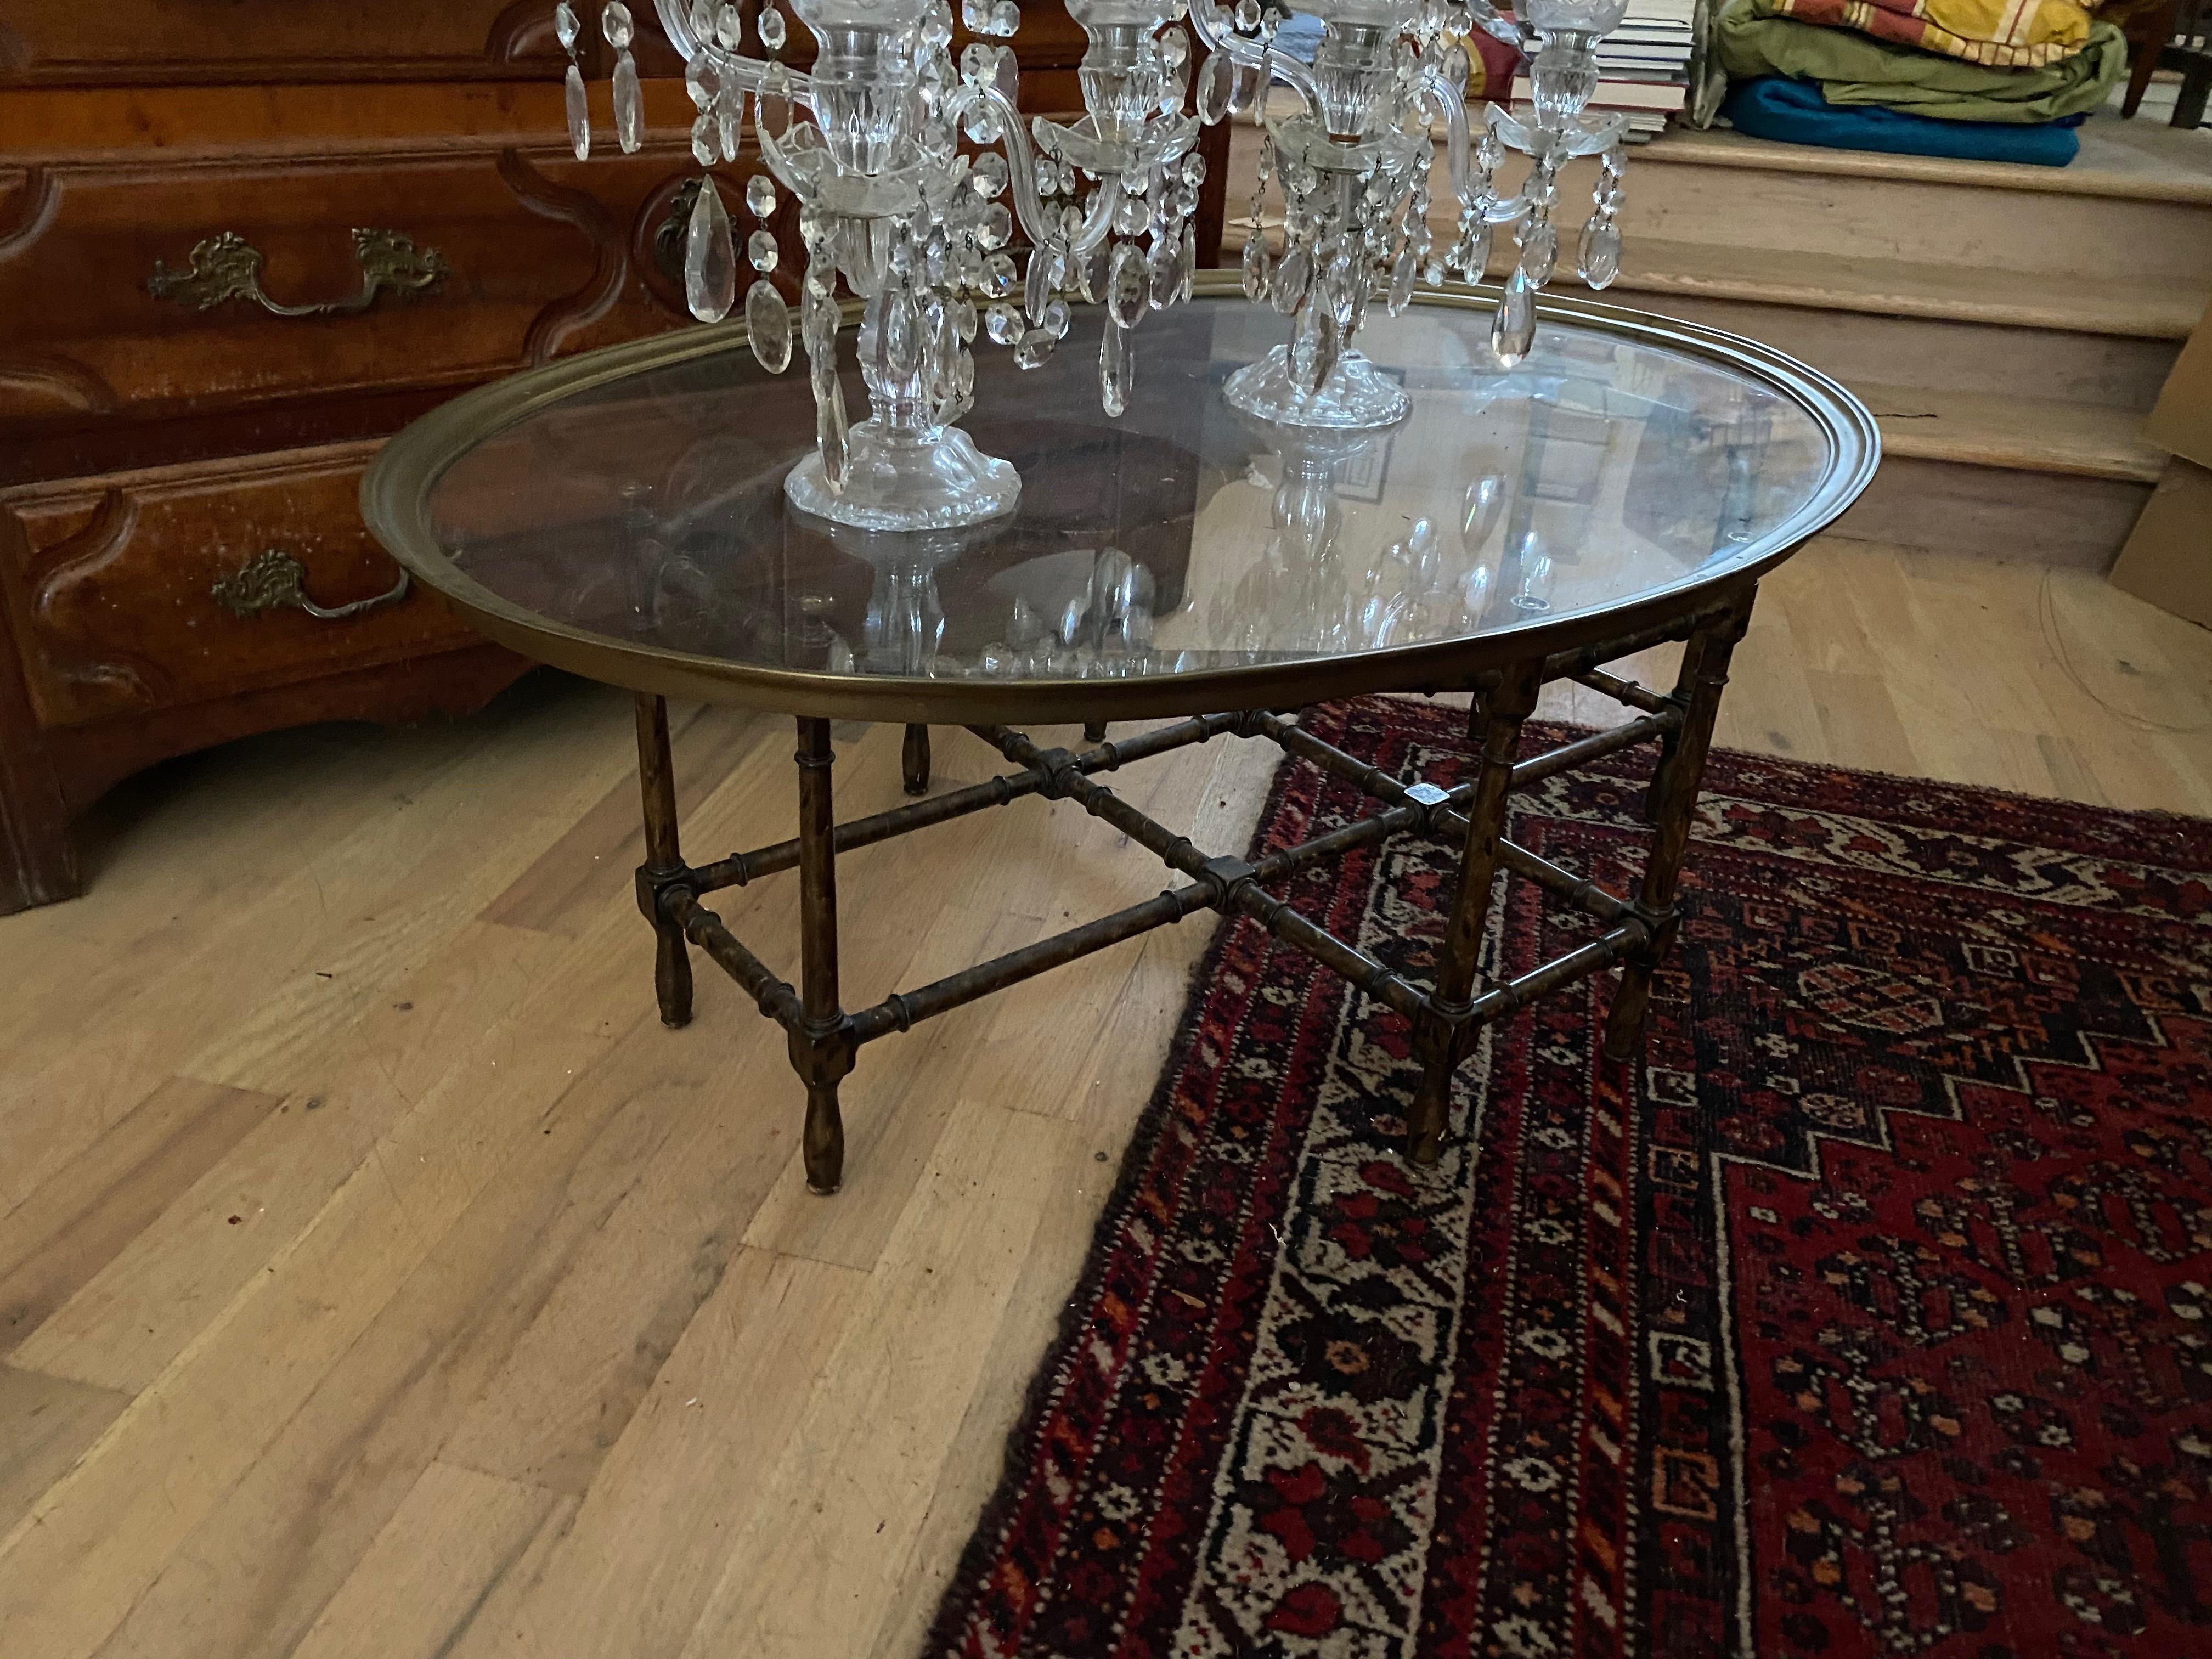 Louis XVI Style Coffee Table with Marble Top.  Lovely Old Worn Patina/Finish. 3